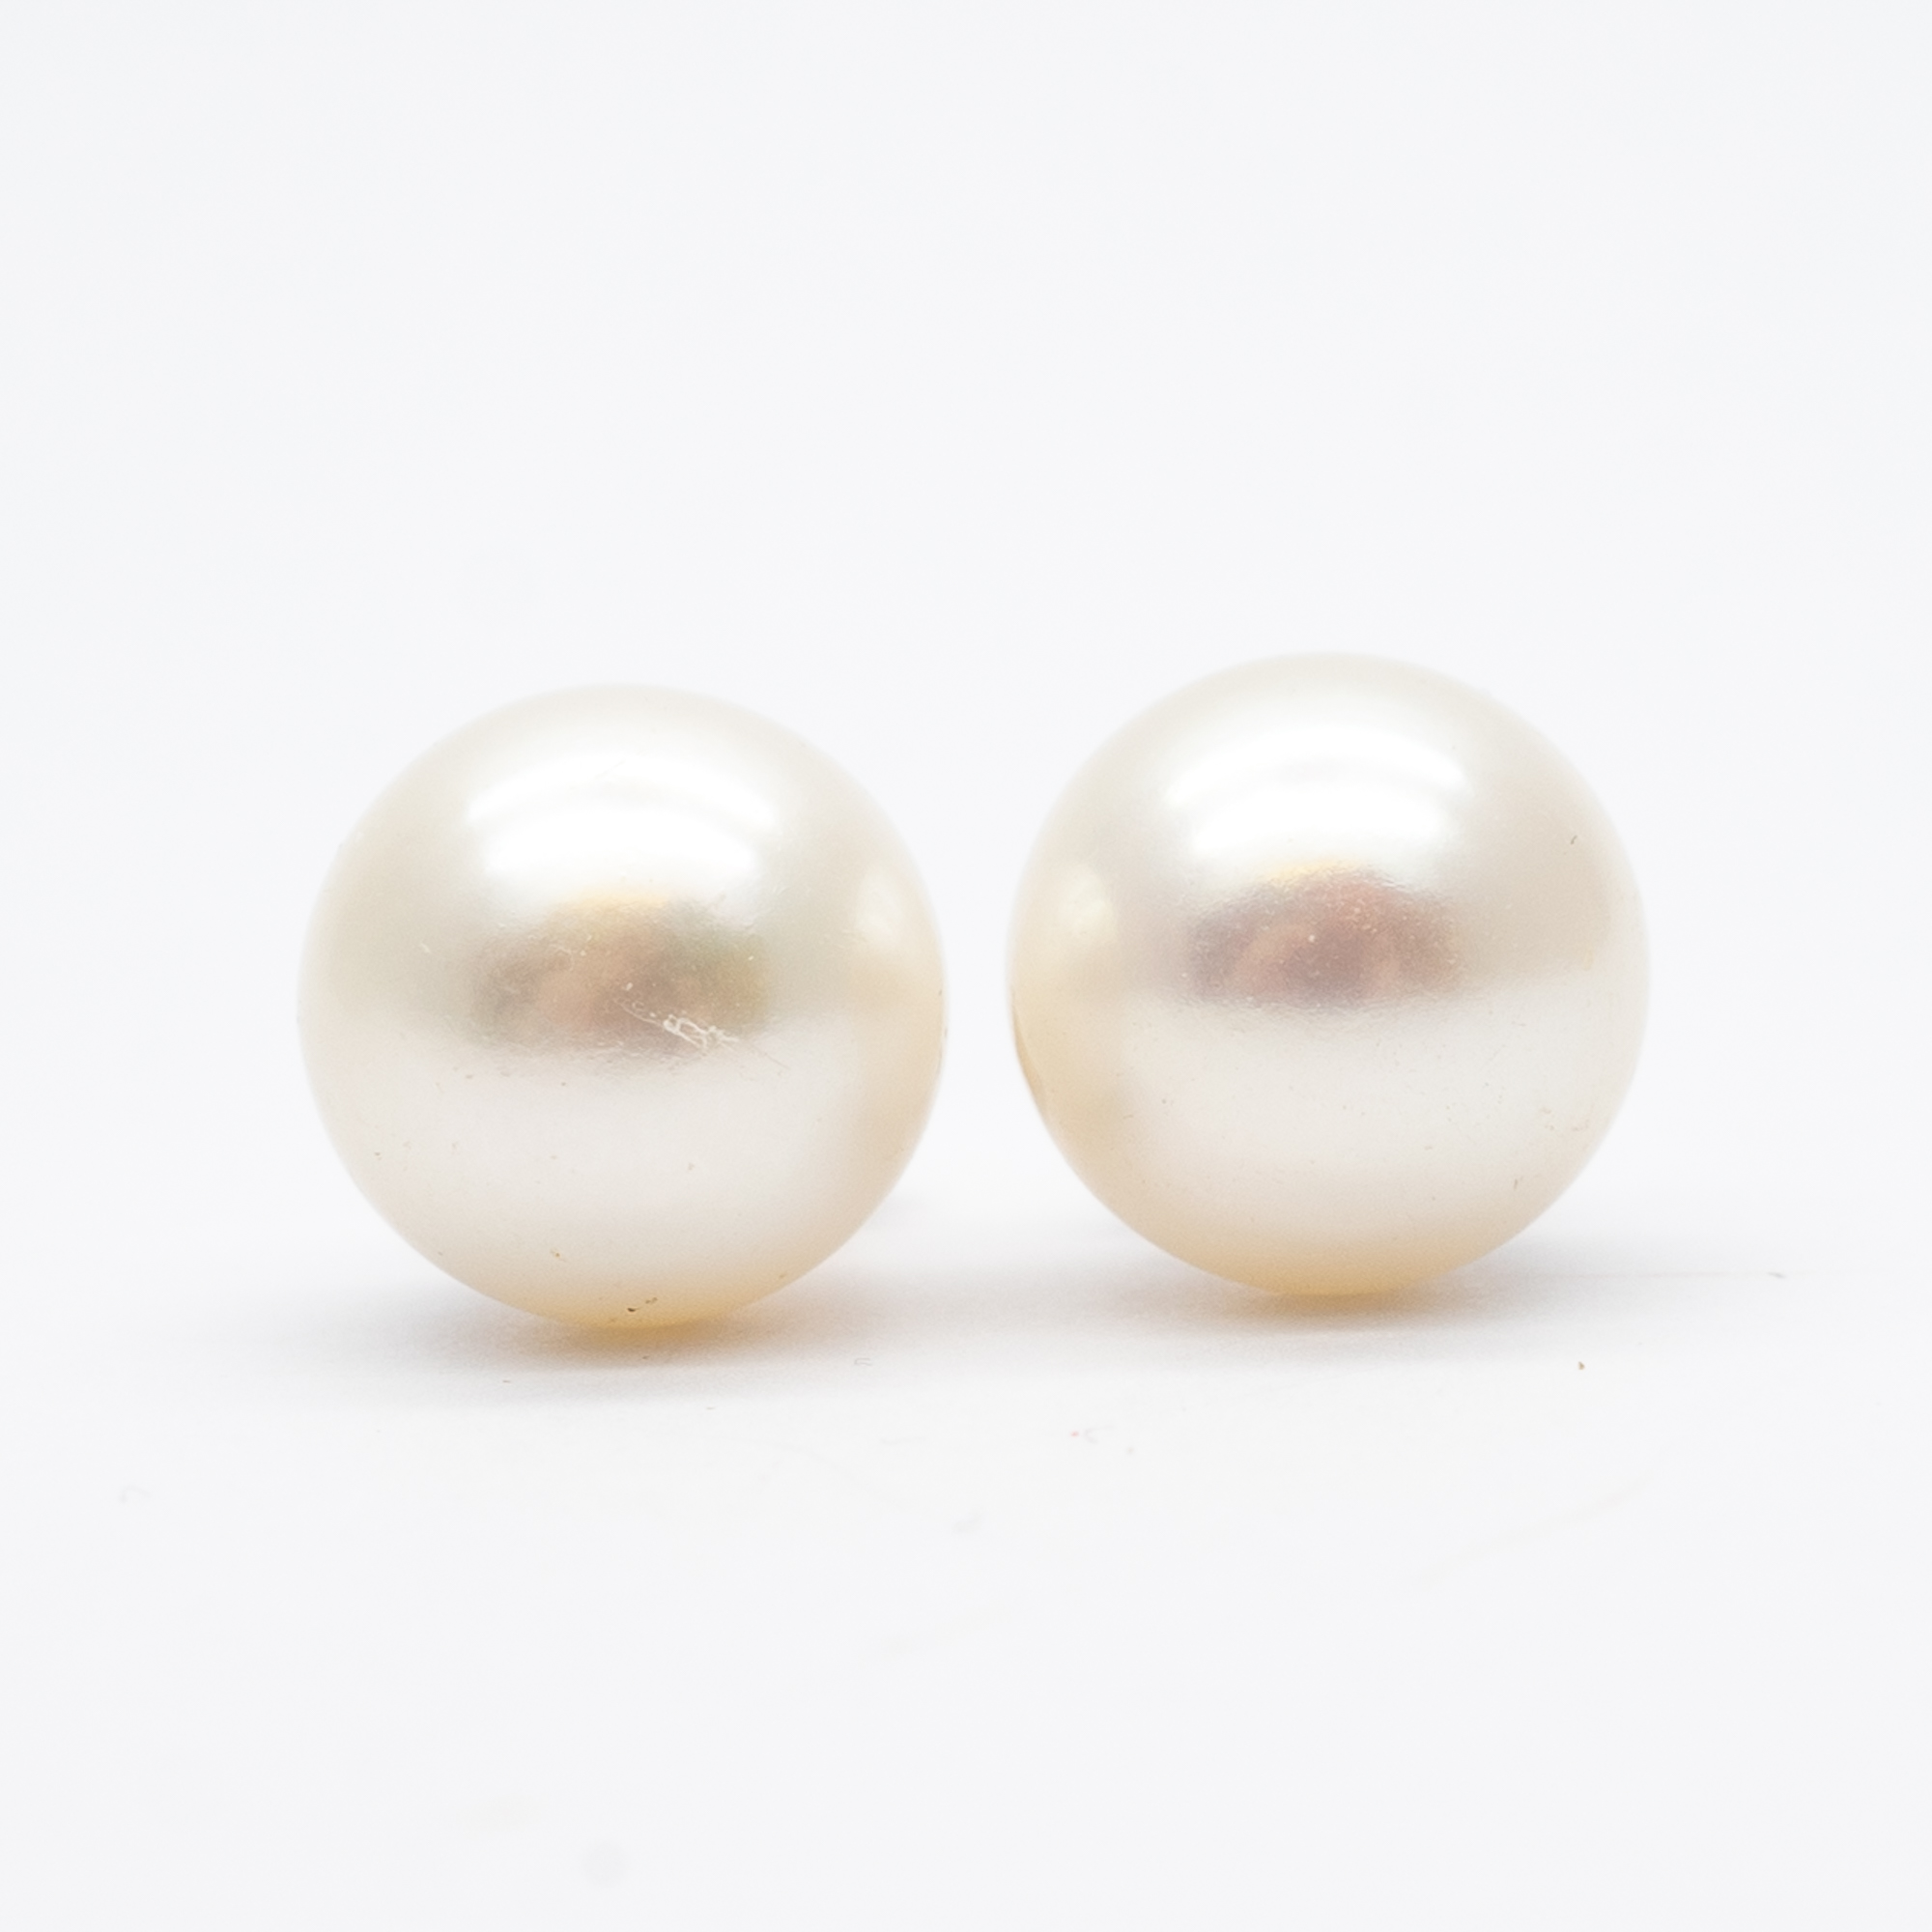 A pair of 9ct yellow gold cultured pearl earrings